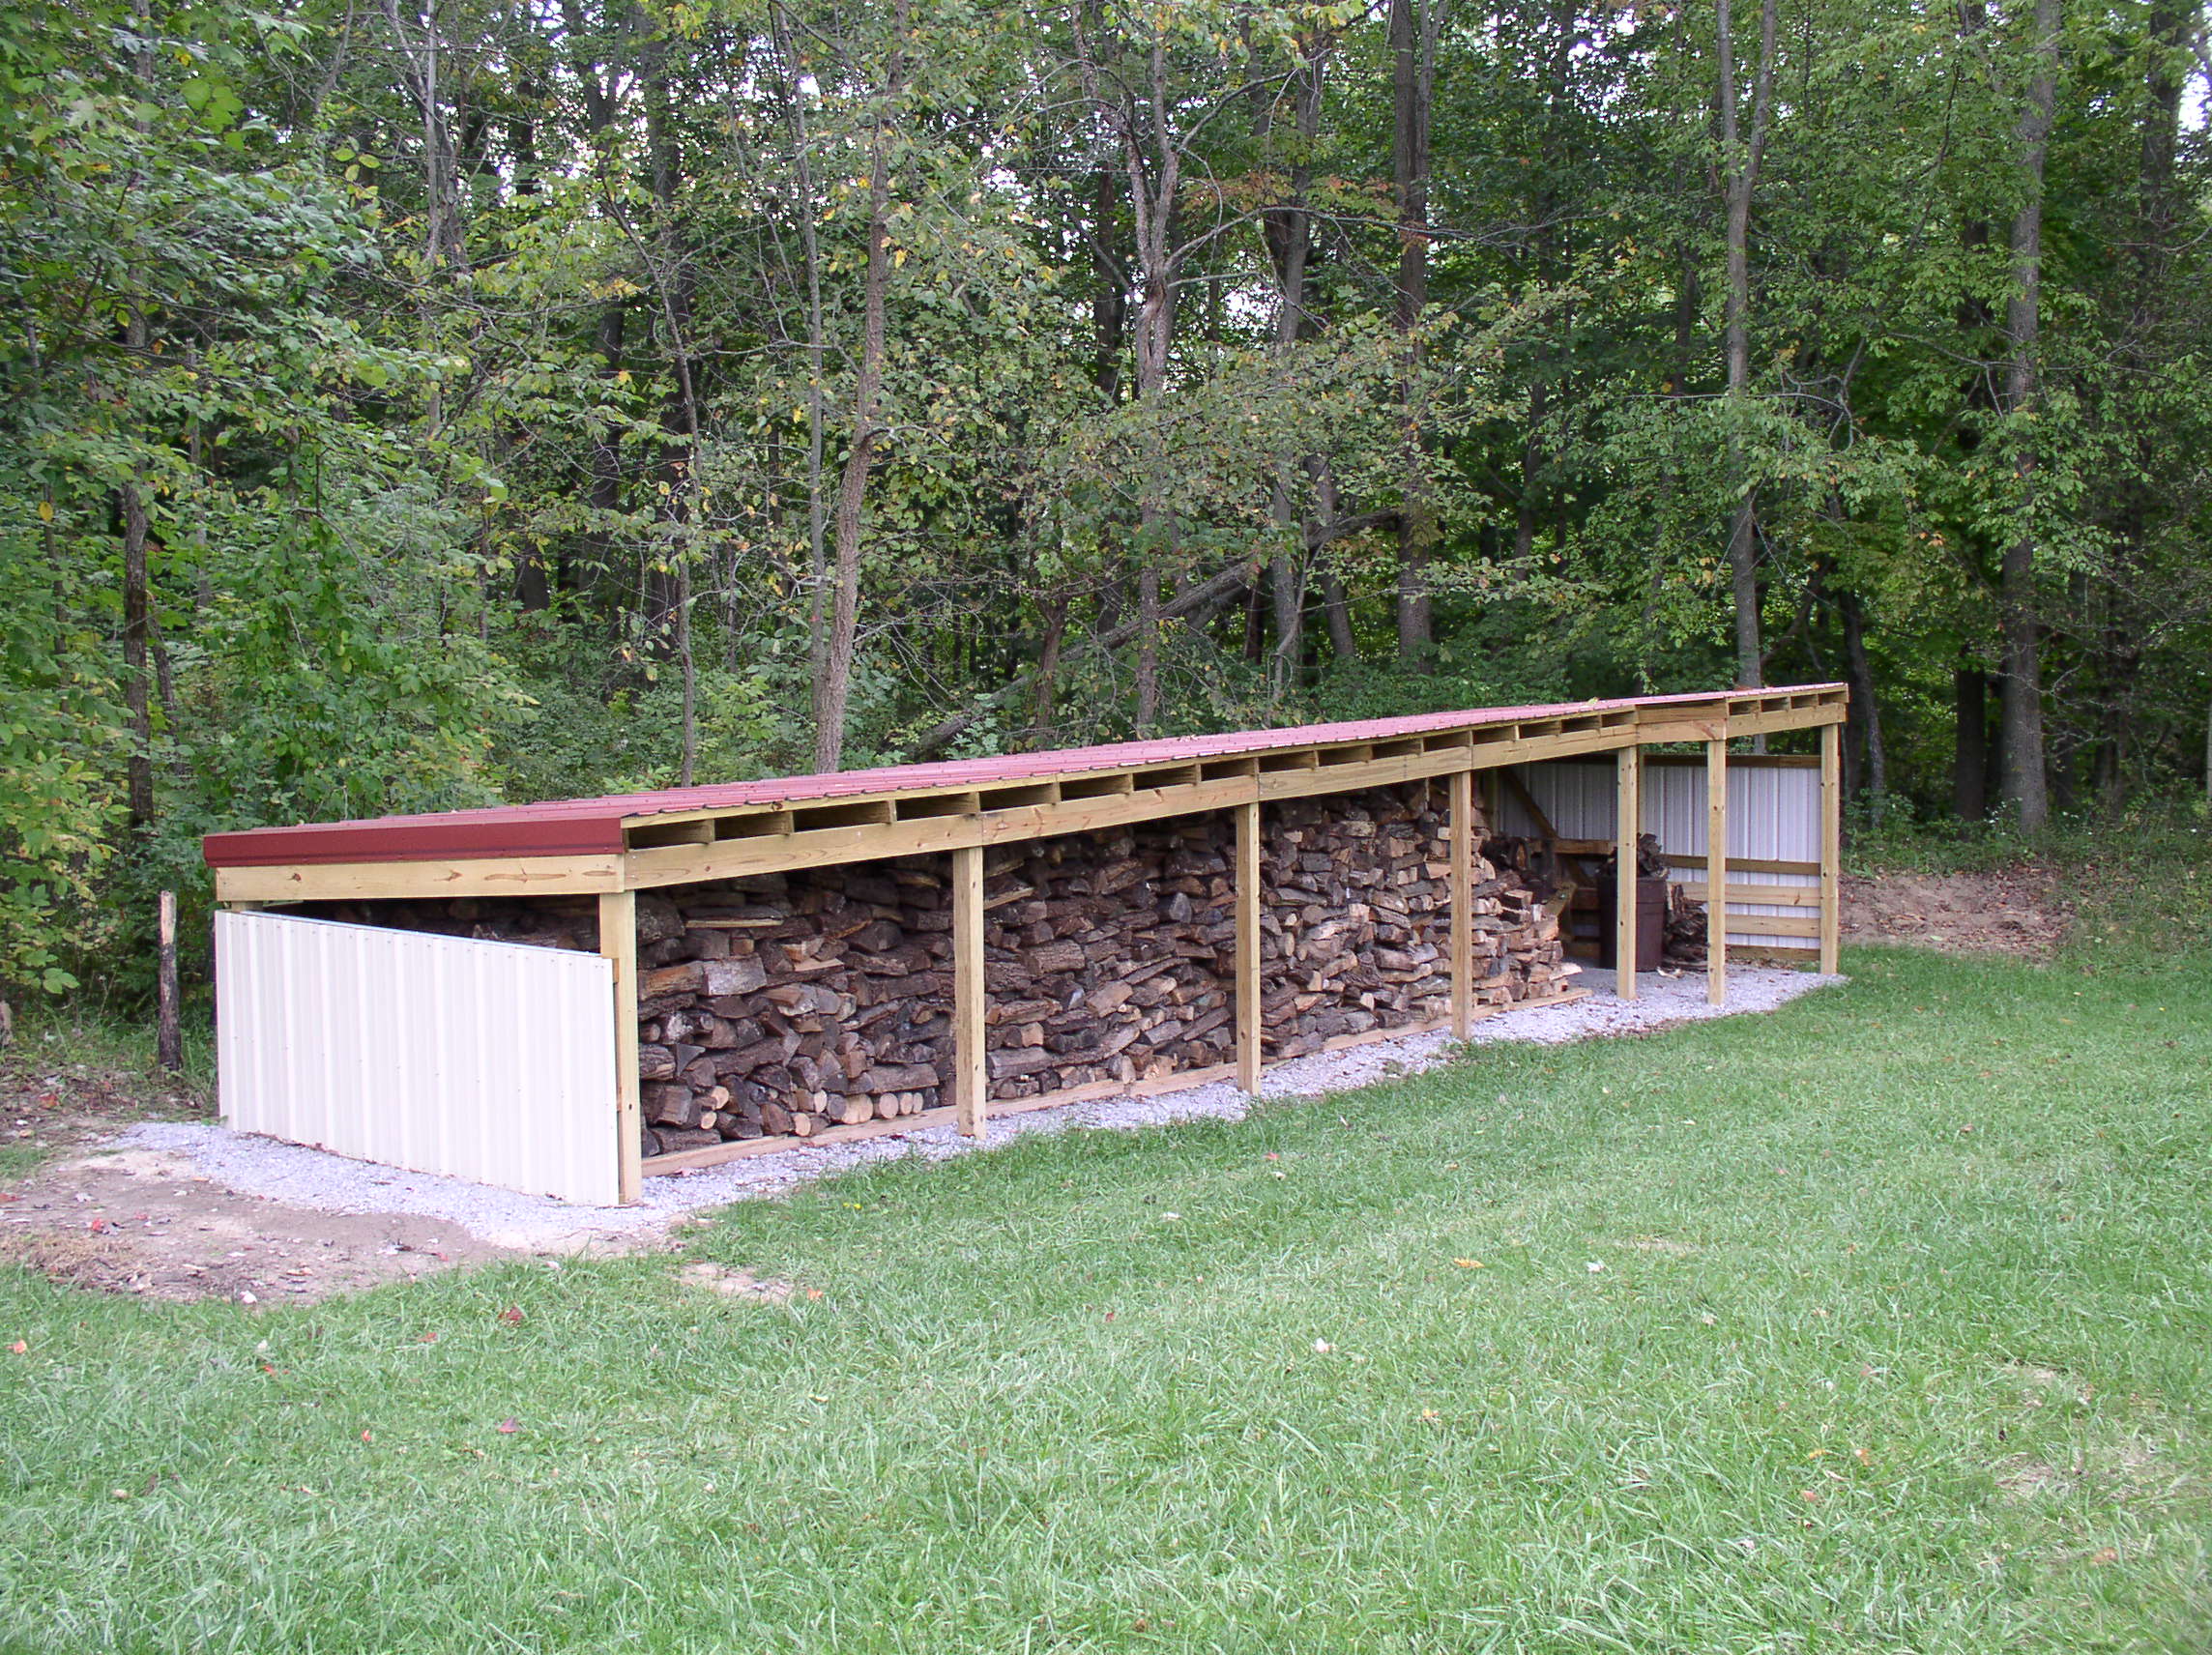 How To Buy Replacement Wood Shed Doors For Your Back Yard Storage Shed ...